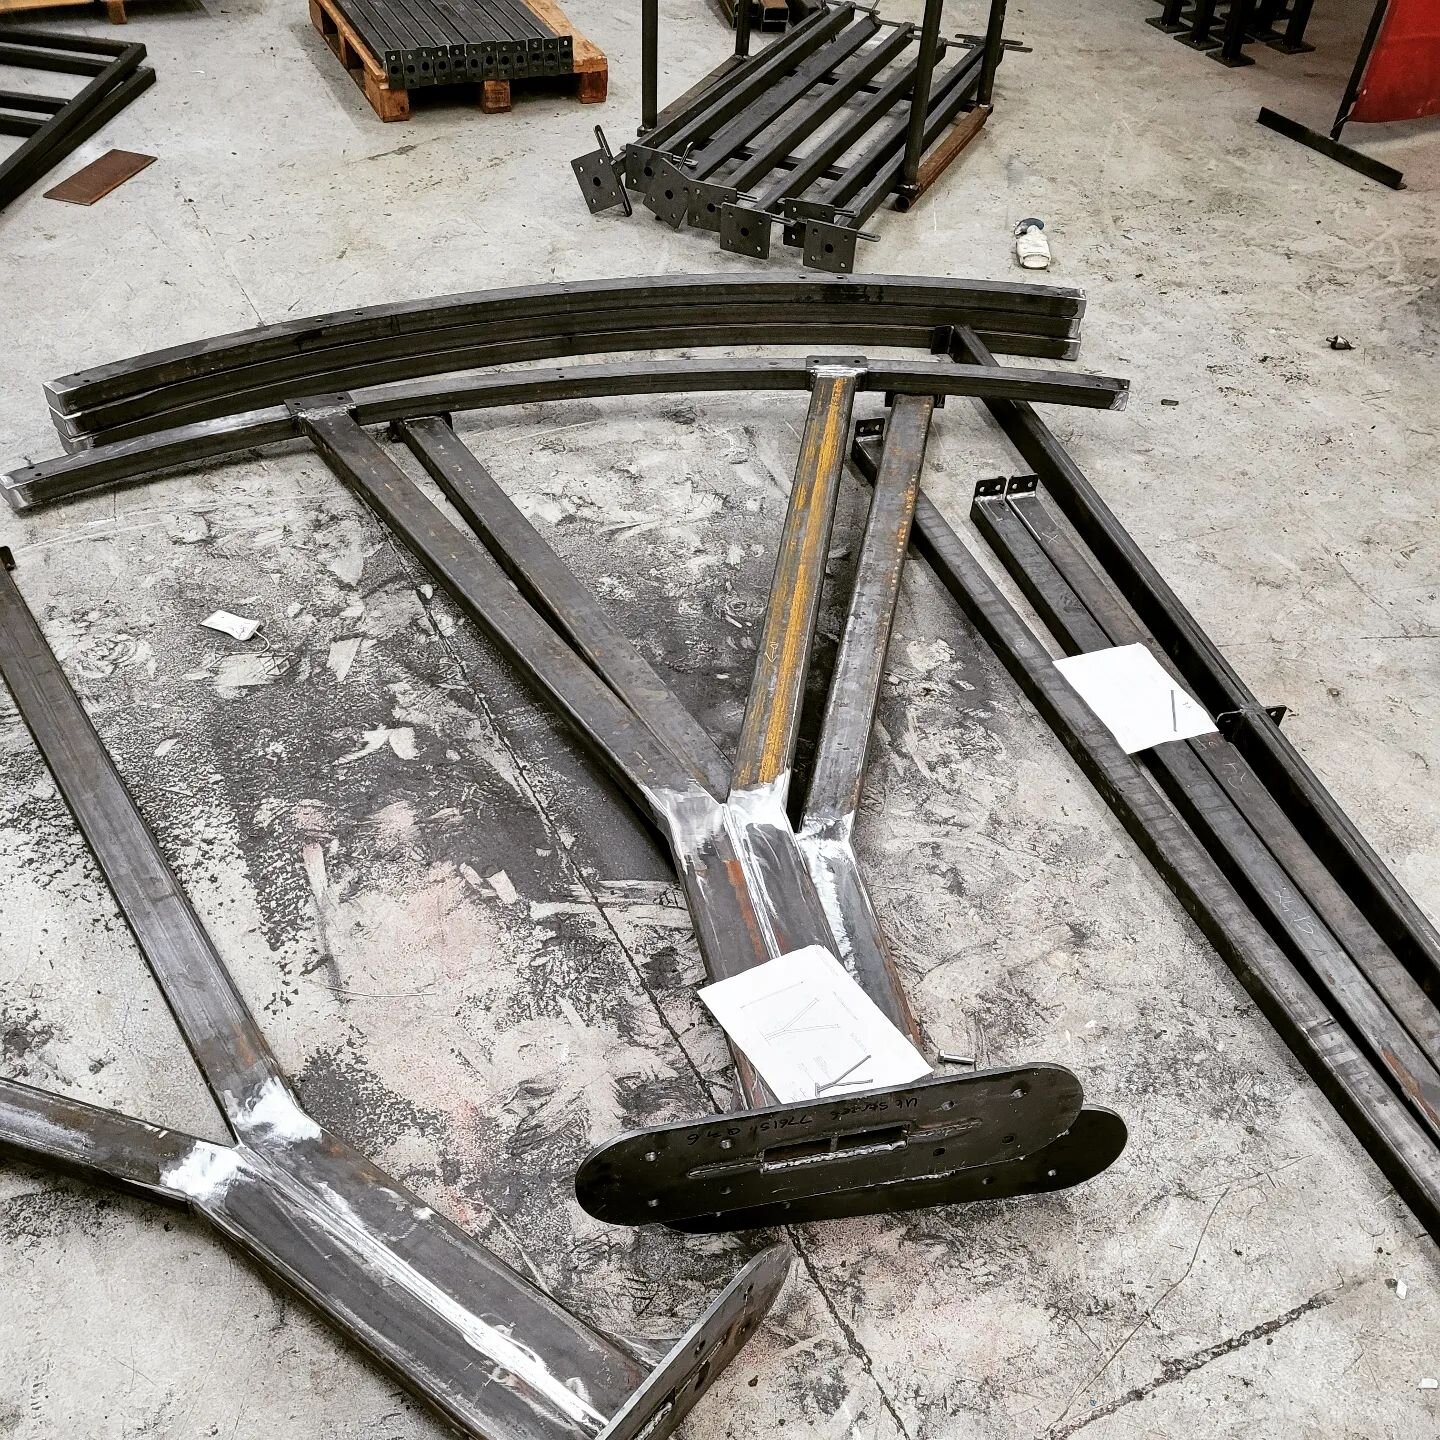 Coming to life, some nice little cycle shelters designed and made by us for a client. 
.
.
.
#cyclestyle #shelter #fabrication #metalwork #steelframe #design #cycle